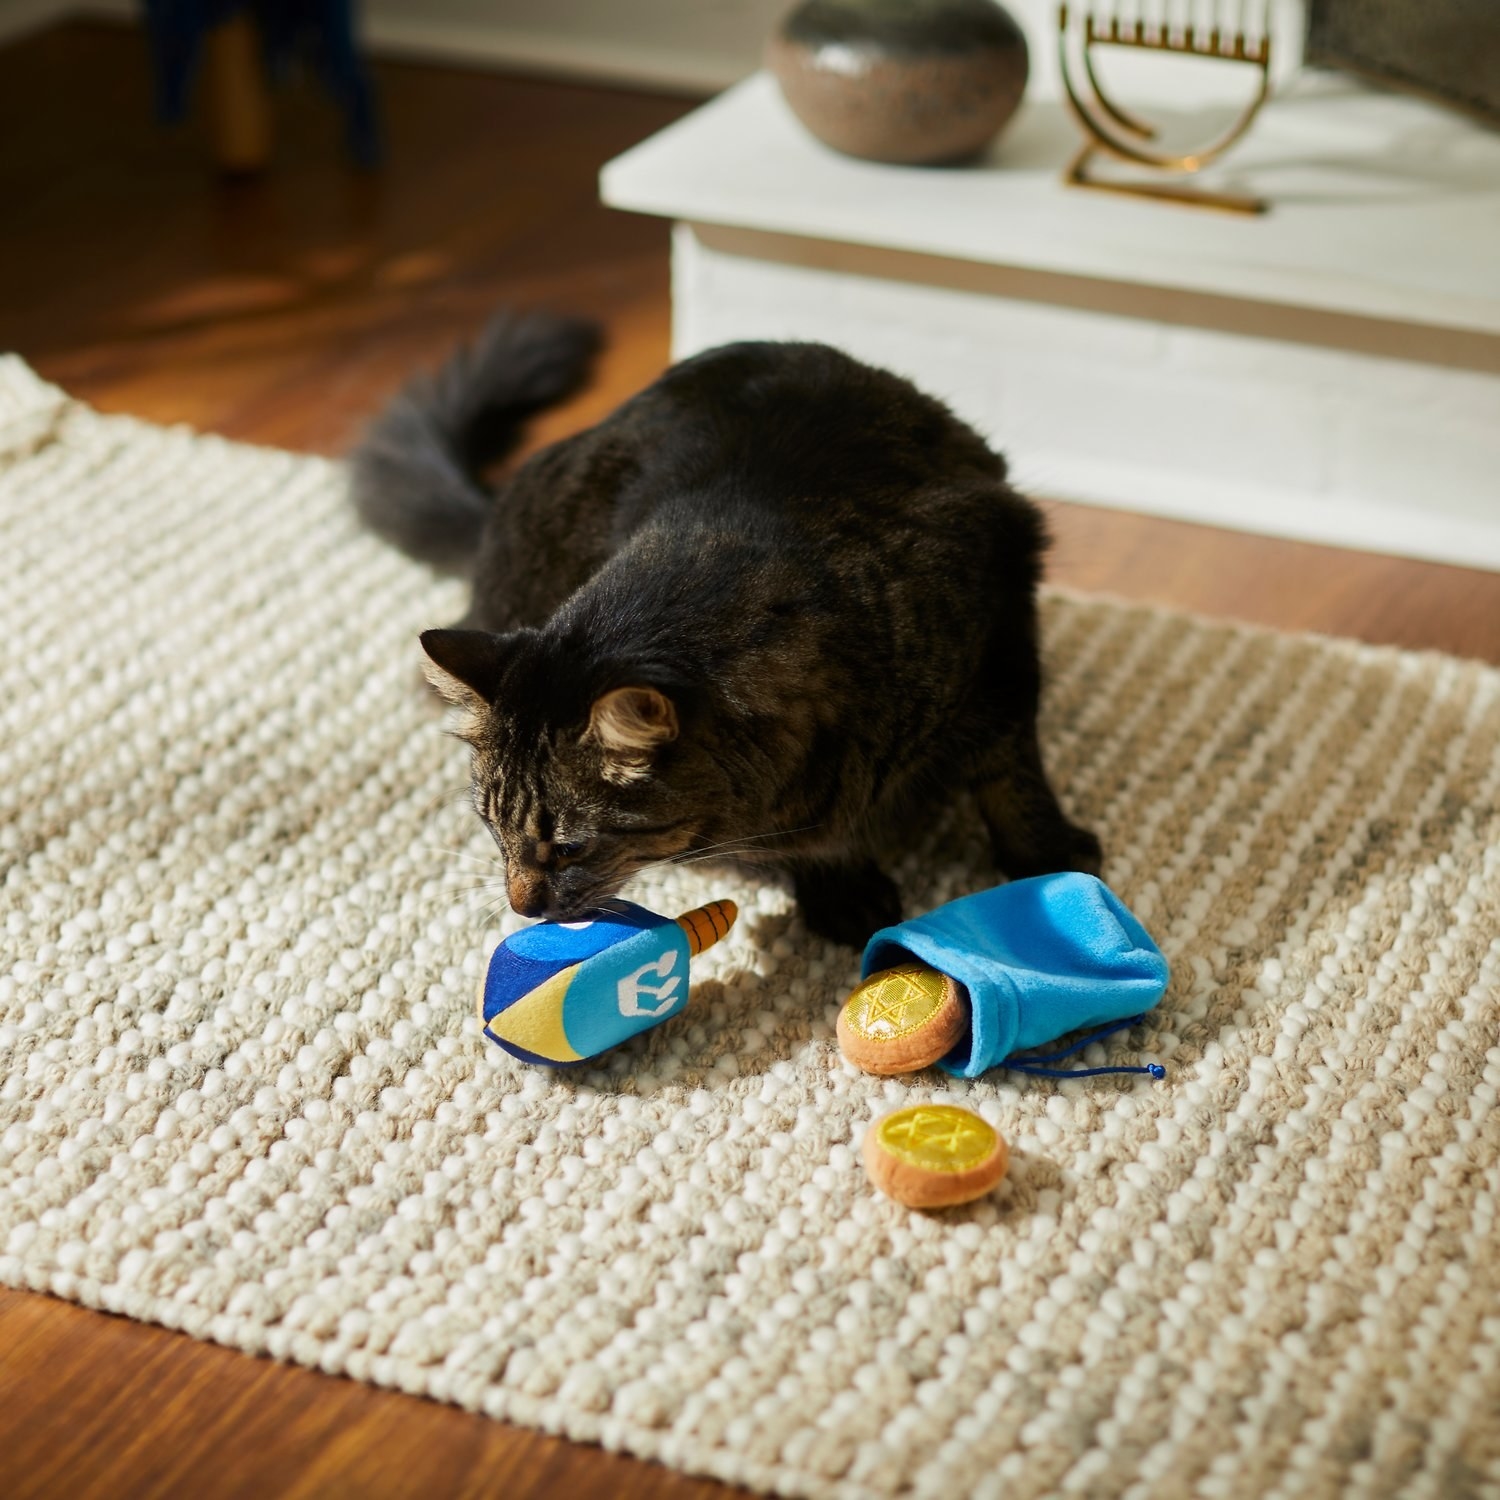 A cat playing with dreidel and coin bag plush toys.